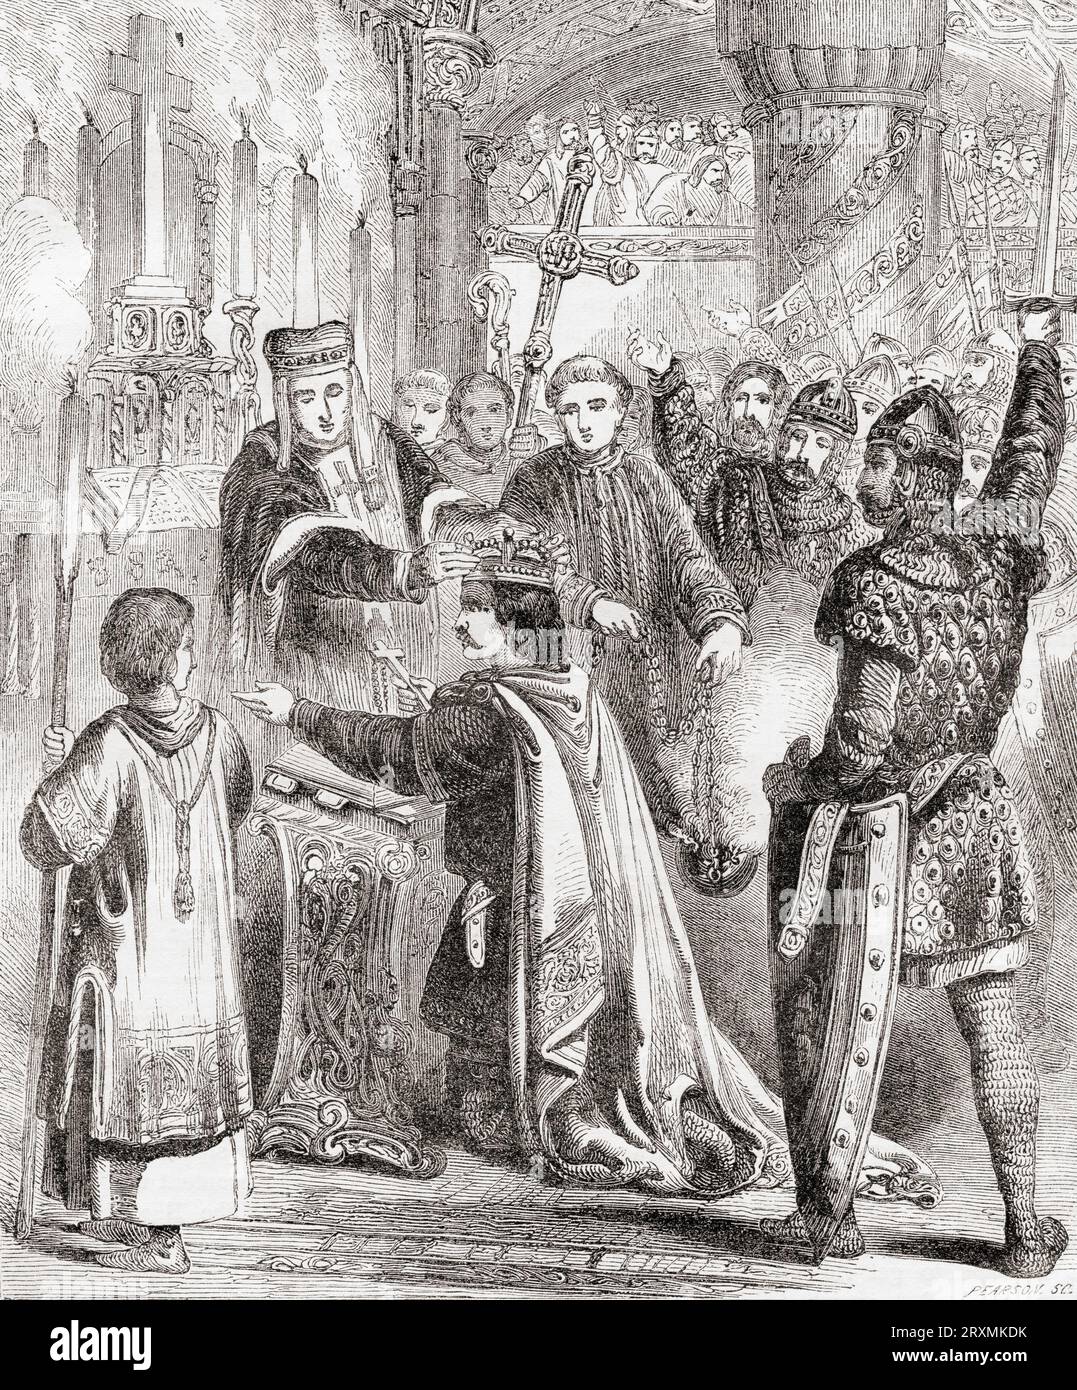 The coronation of William the Conqueror, 1066.  William I, c. 1028 - 1087, aka William the Conqueror and William the Bastard.  First Norman king of England.  From Cassell's Illustrated History of England, published 1857. Stock Photo